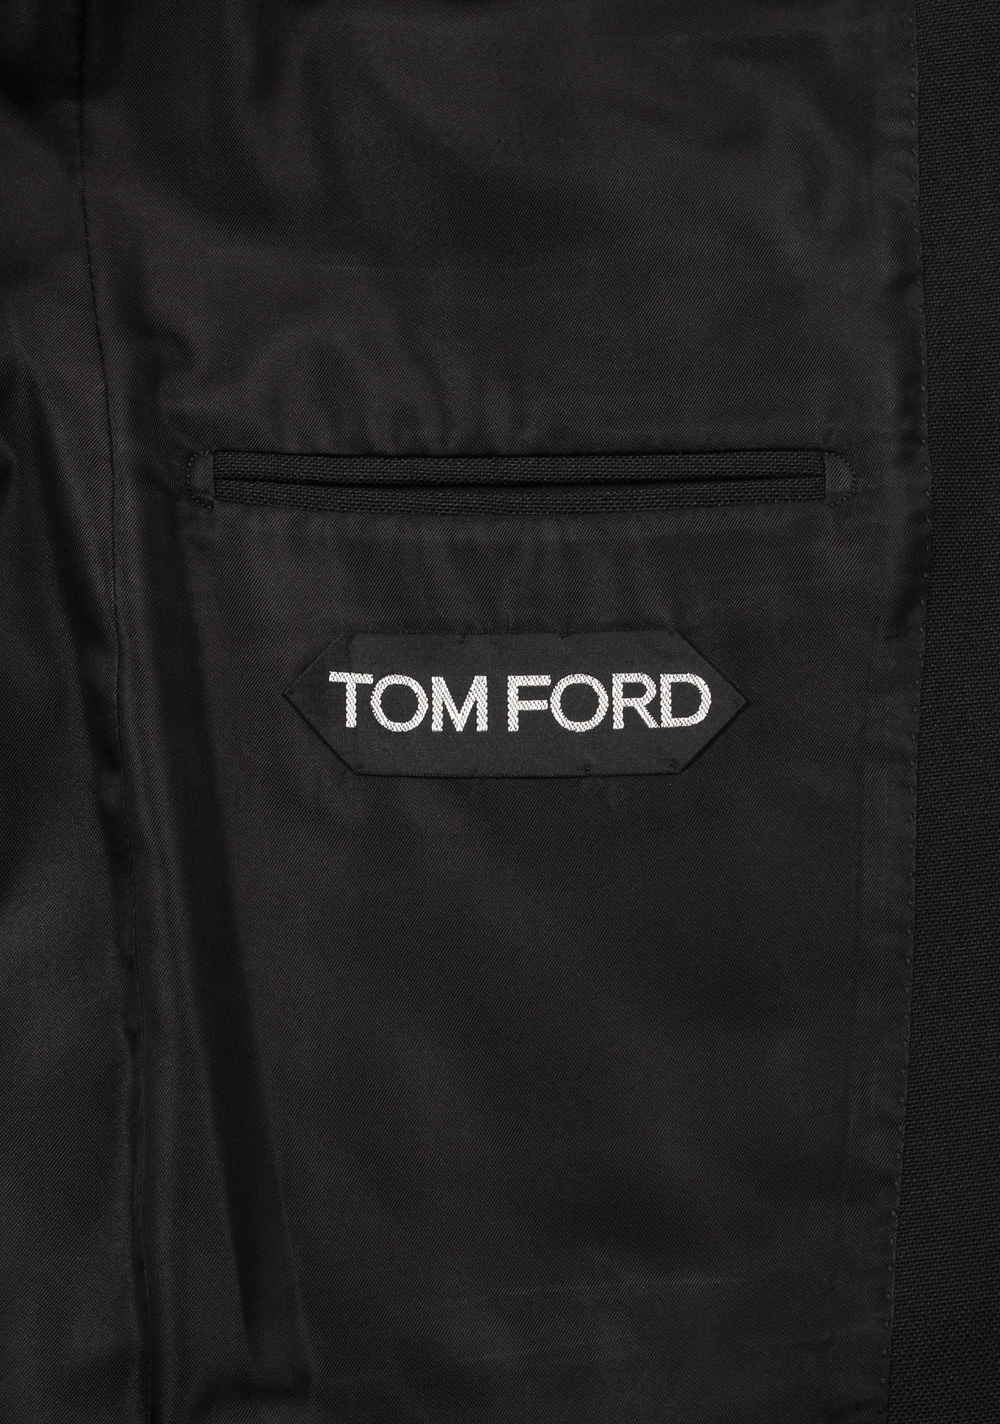 TOM FORD Shelton Solid Black Suit Size 44 / 34R U.S. In Mohair ...